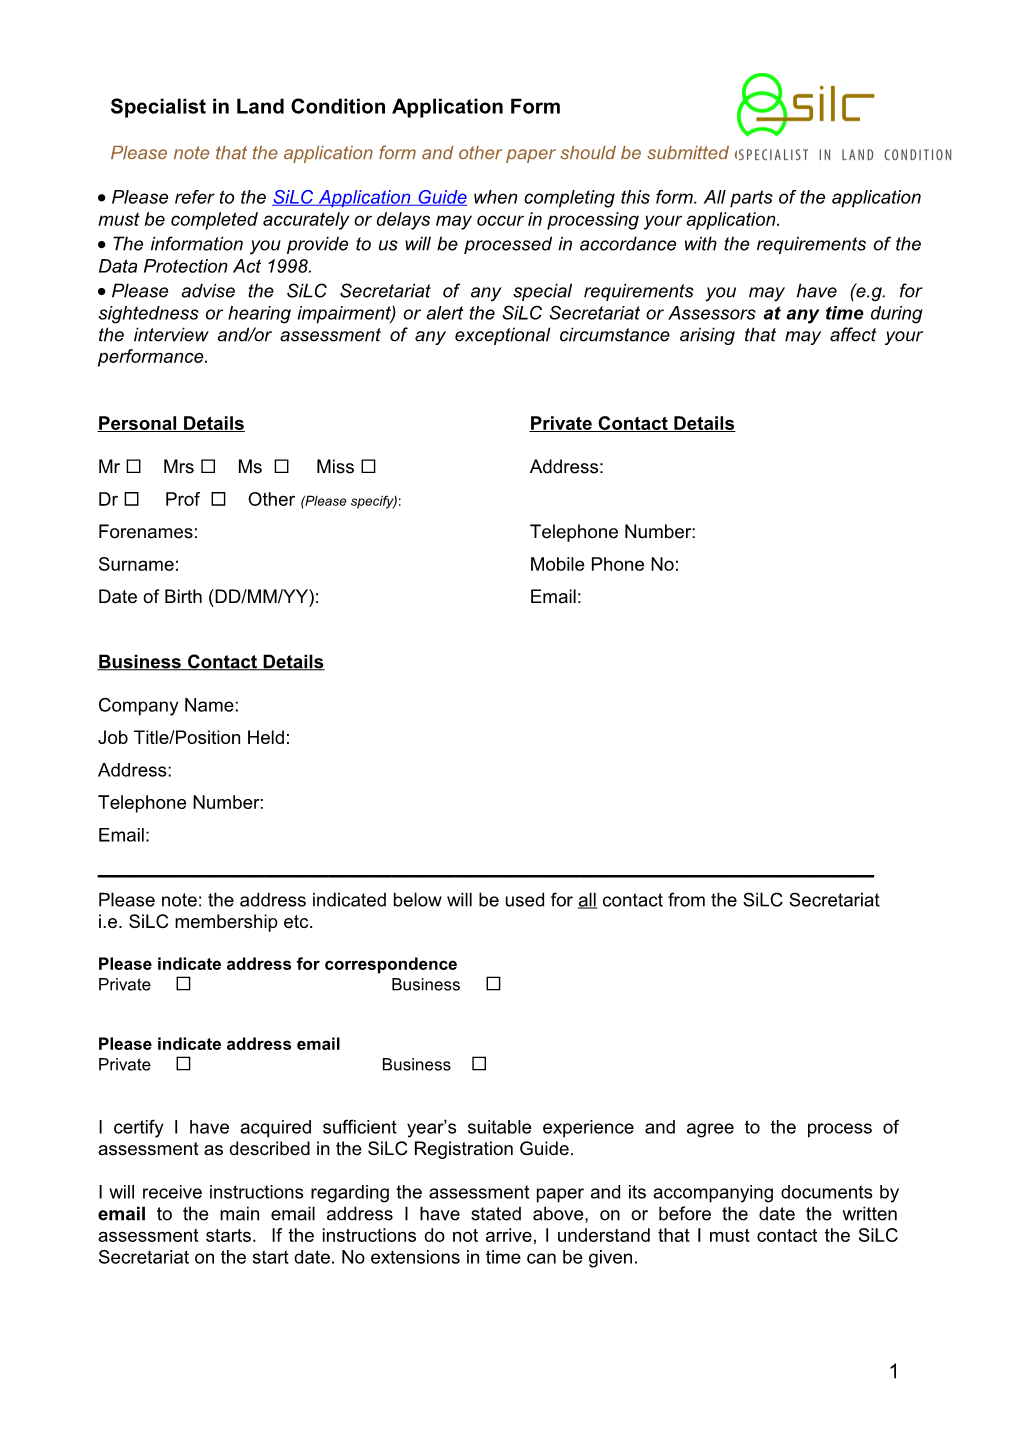 Specialist in Land Condition Application Form